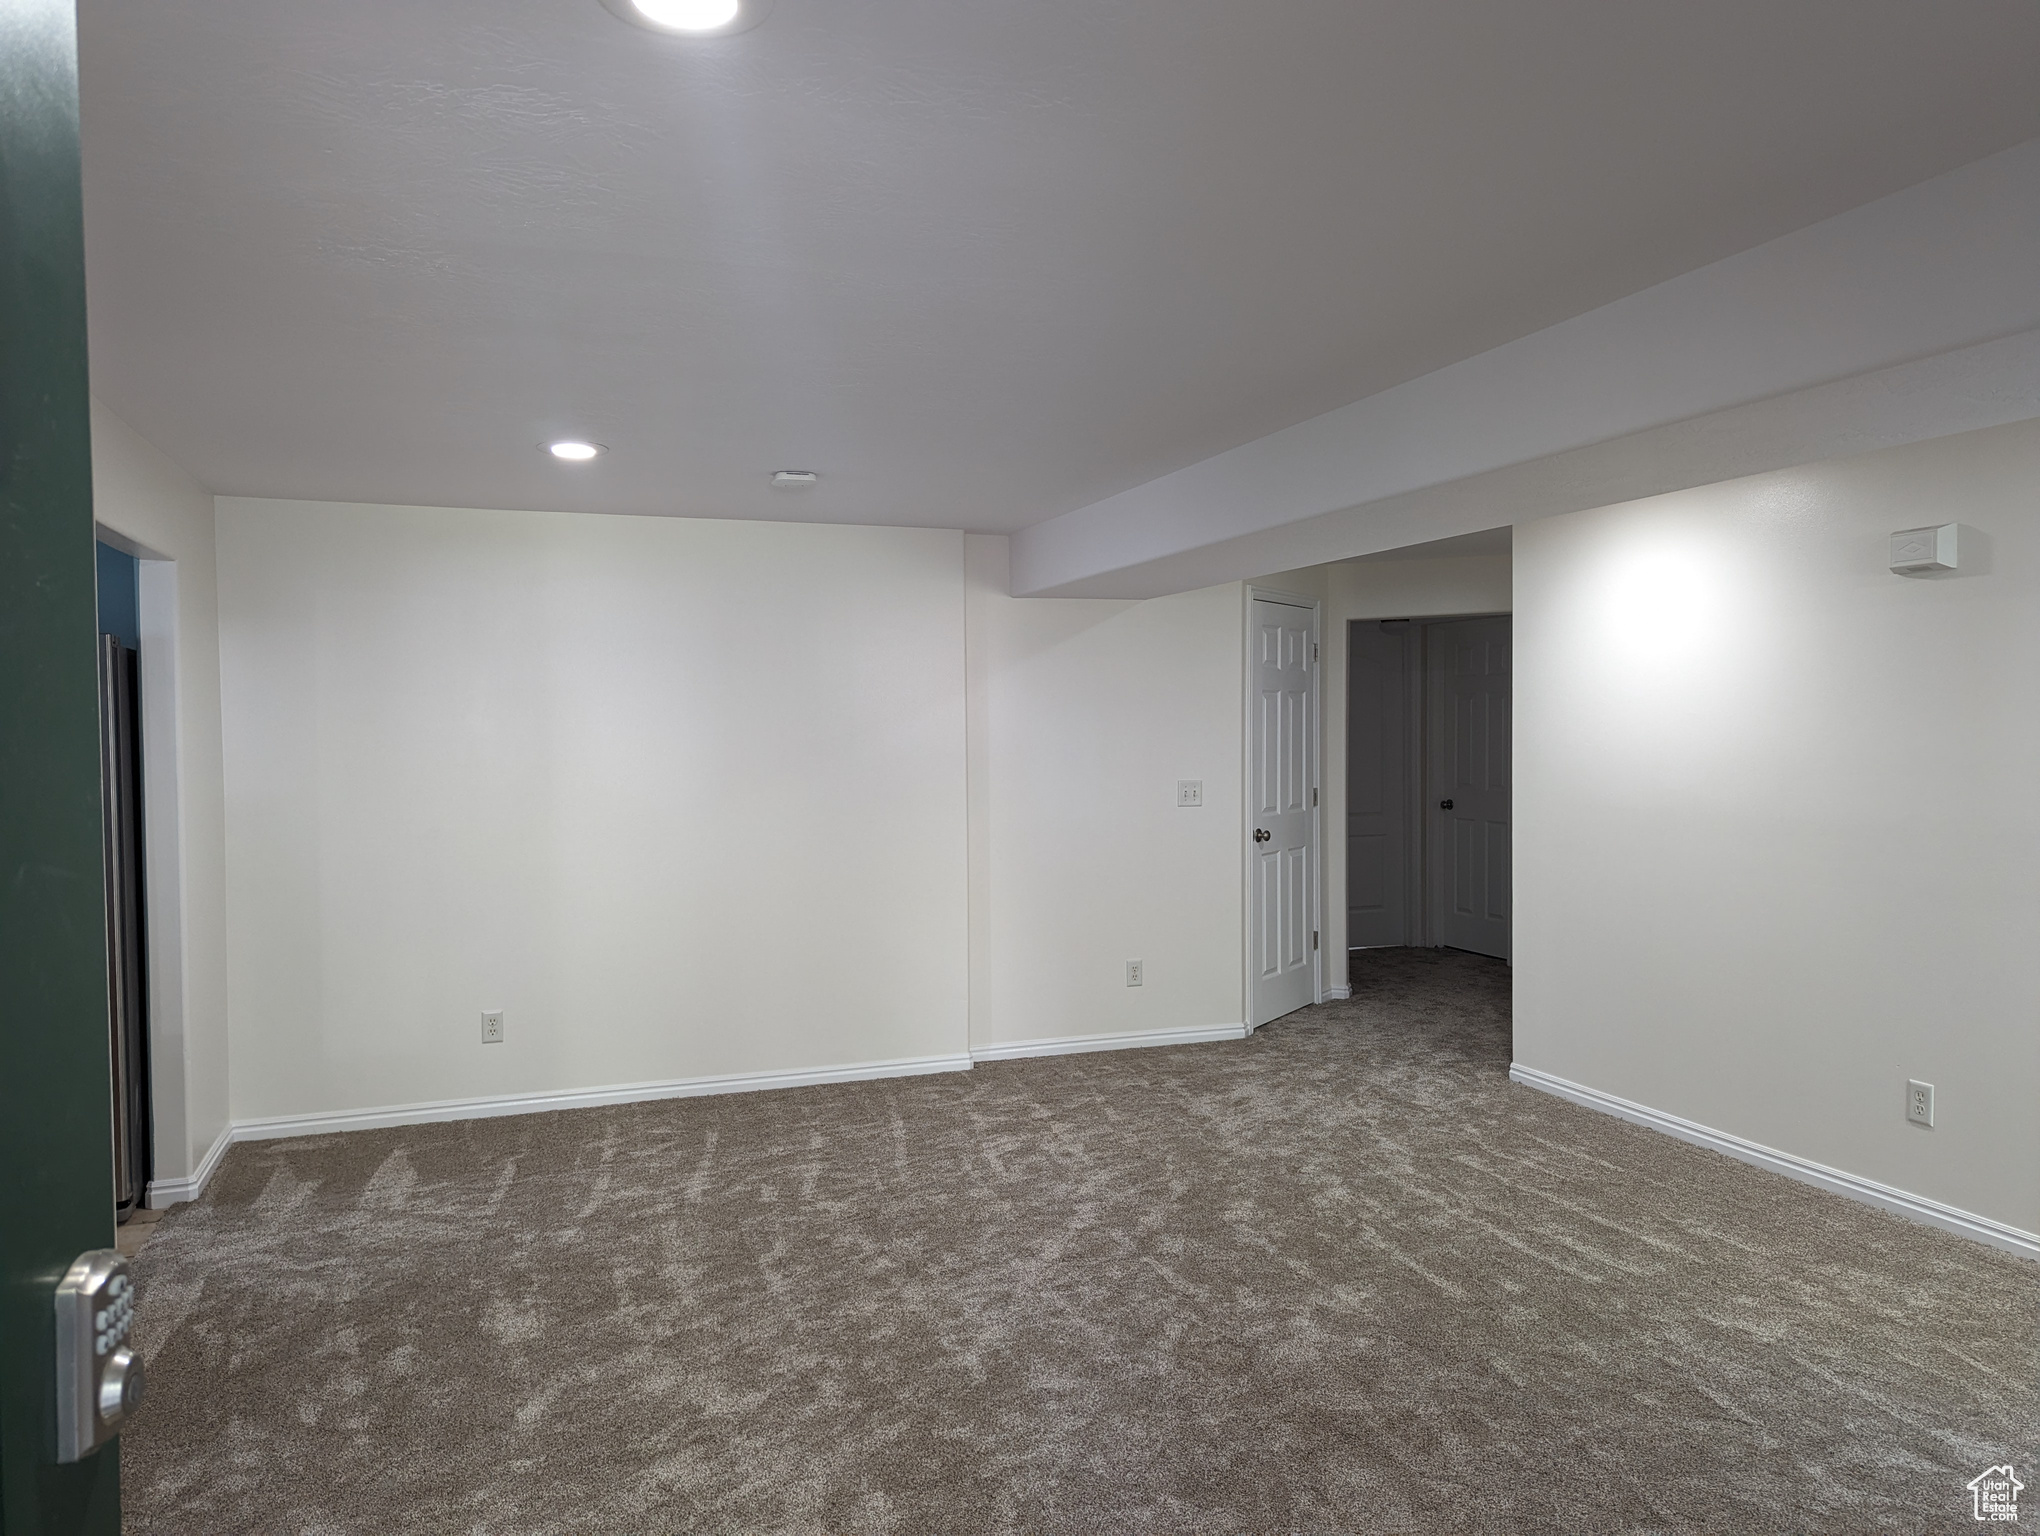 Great room with dark colored carpet